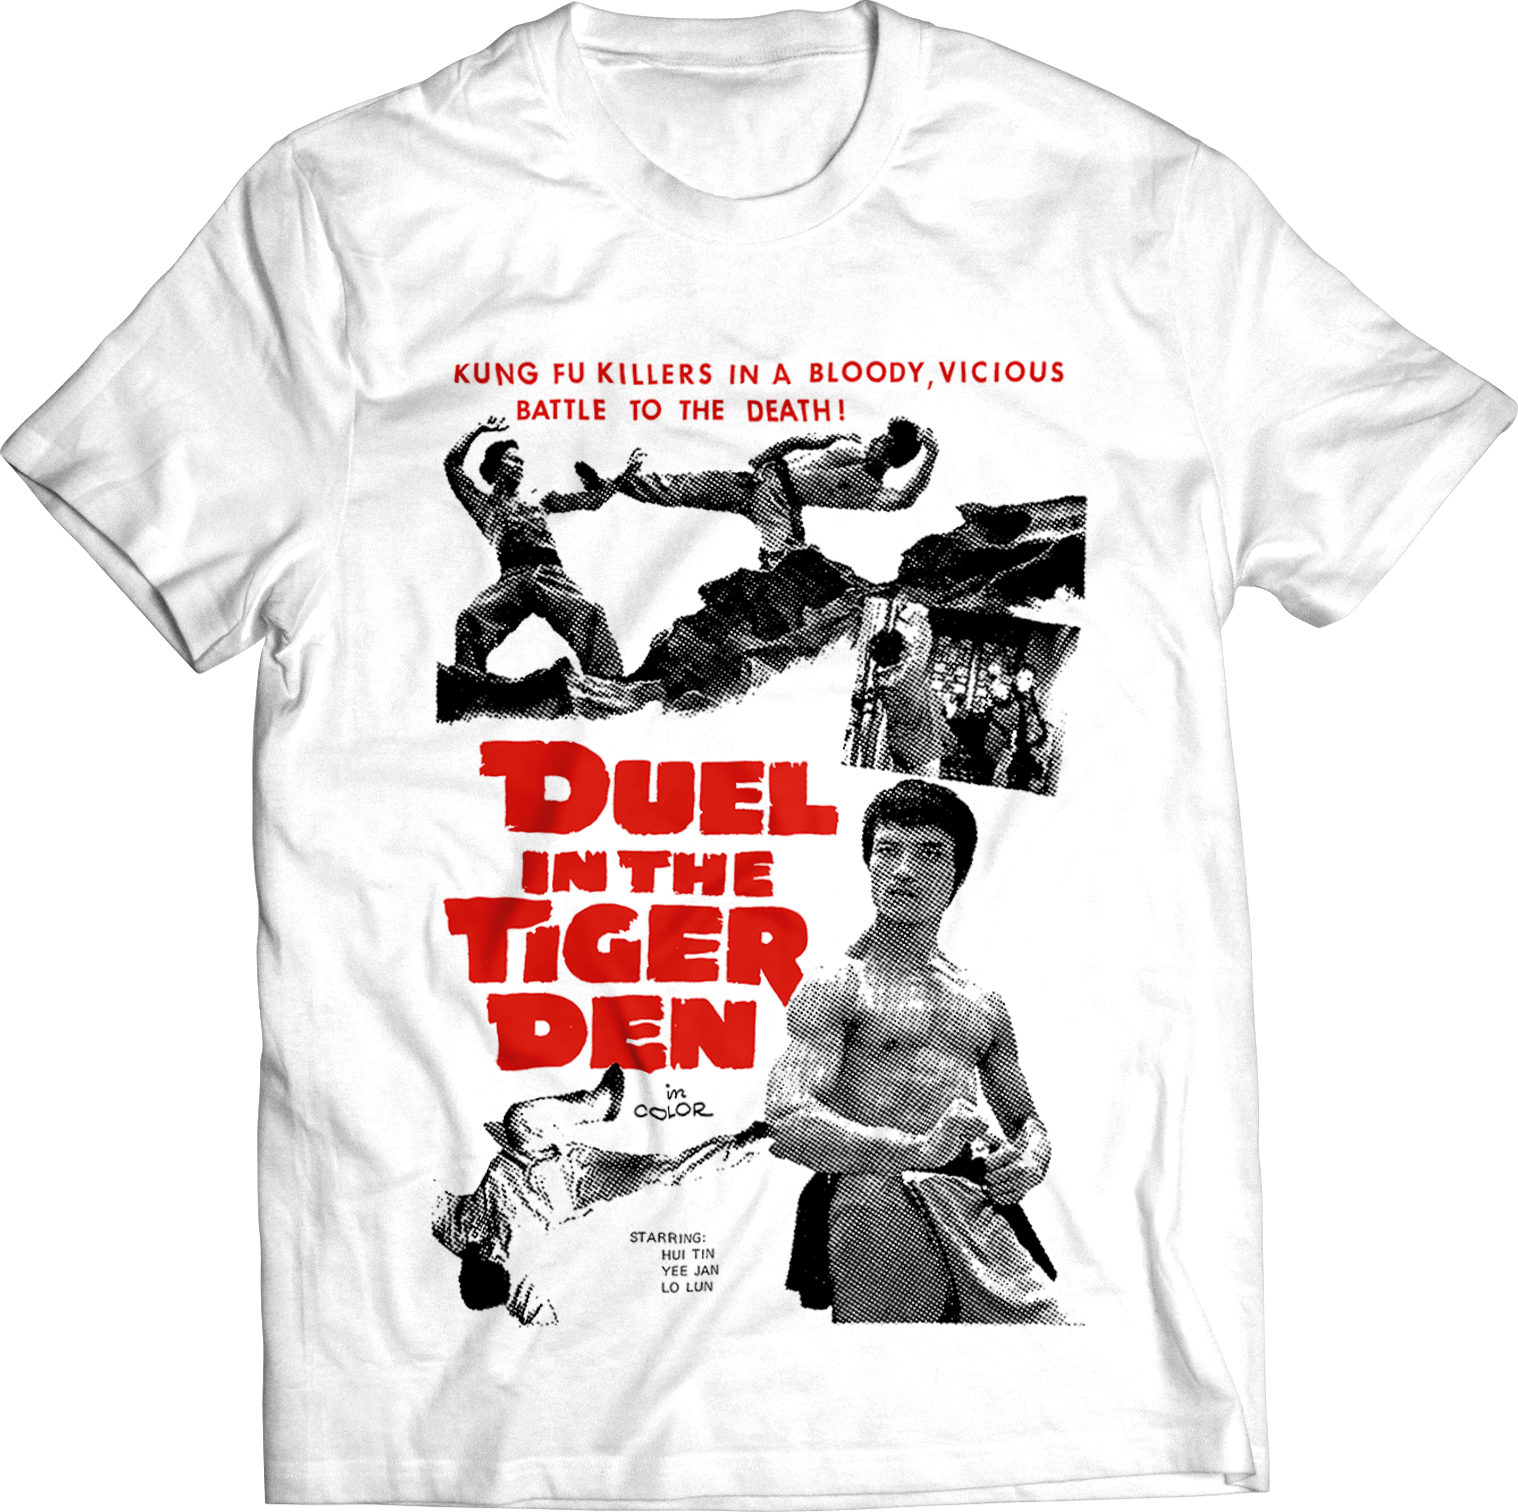 ATOM AGE: "DUEL IN THE TIGER DEN" T-SHIRT